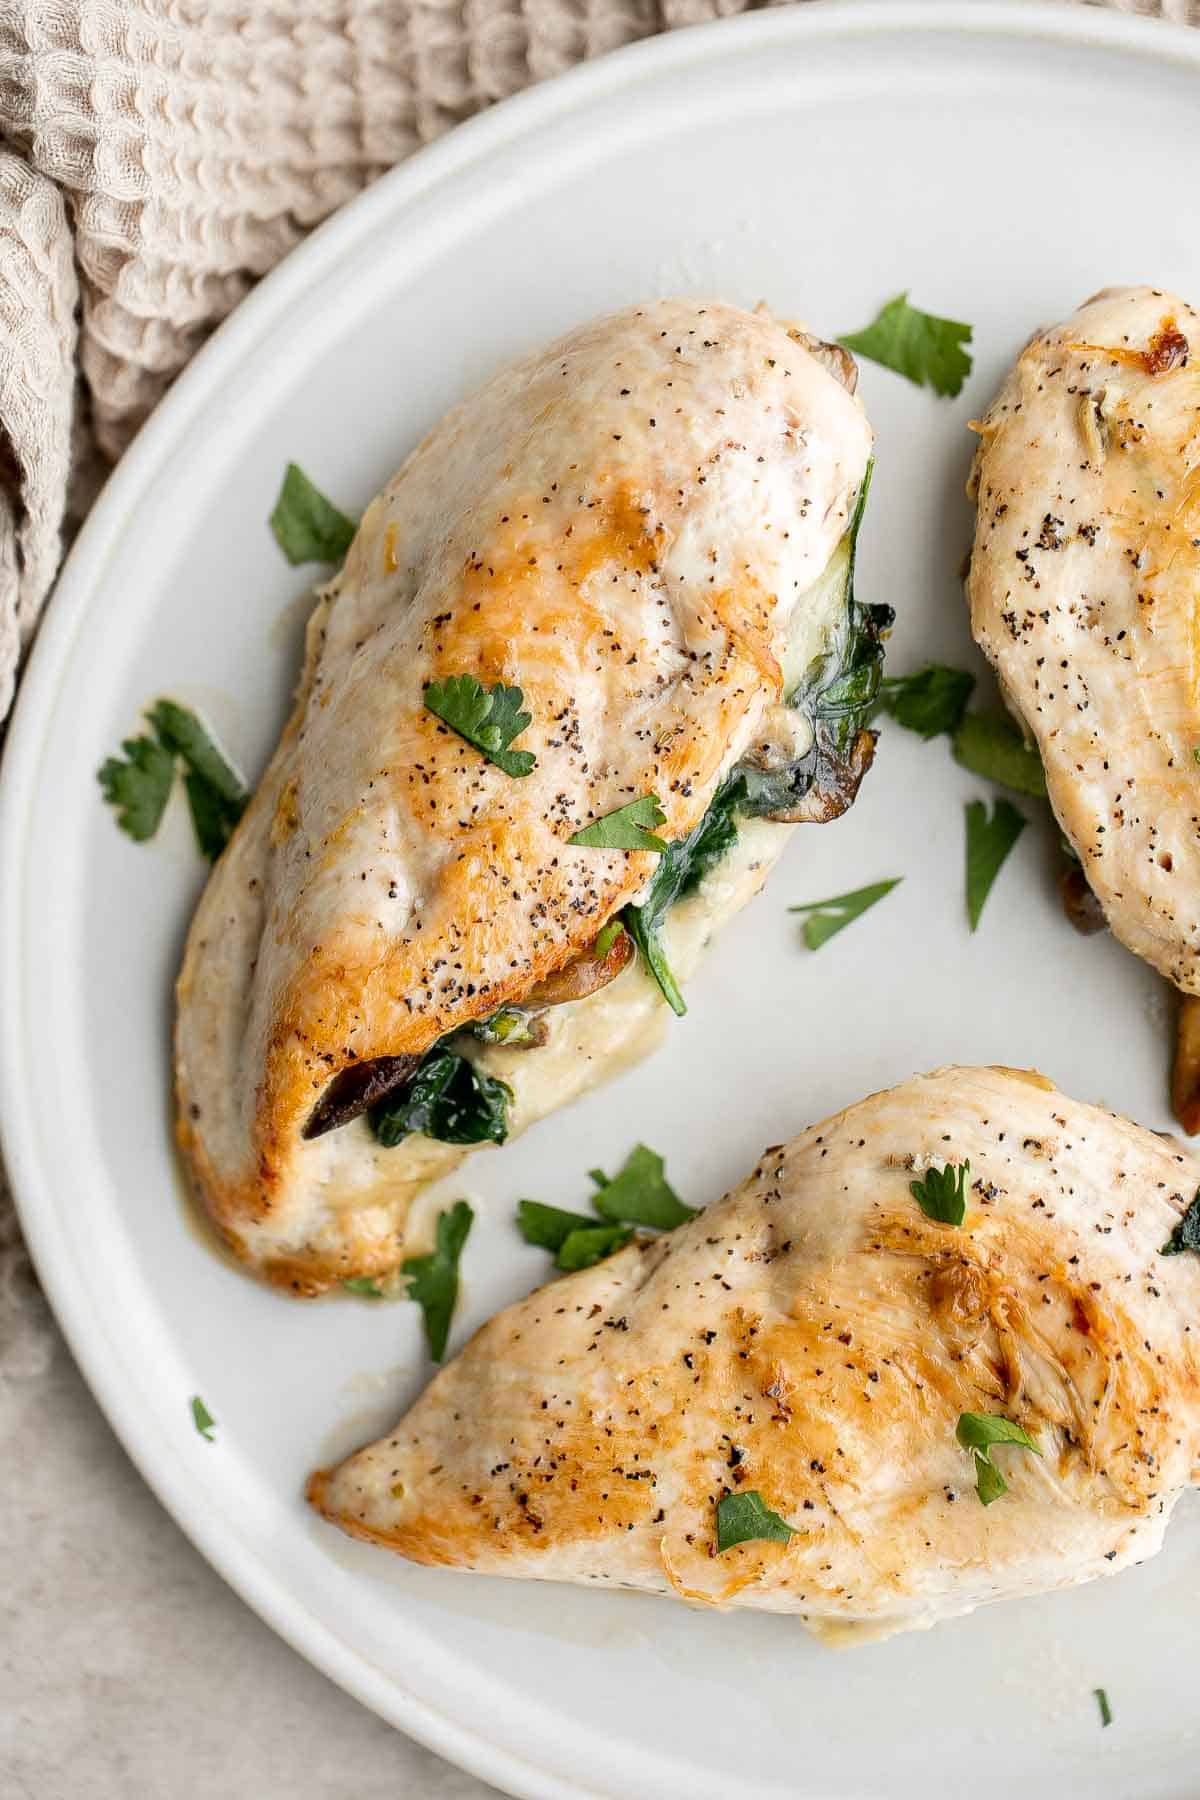 Stuffed Chicken Breasts loaded with mushrooms and spinach are juicy, tender, and flavorful. A handful of simple ingredients transforms regular chicken. | aheadofthyme.com